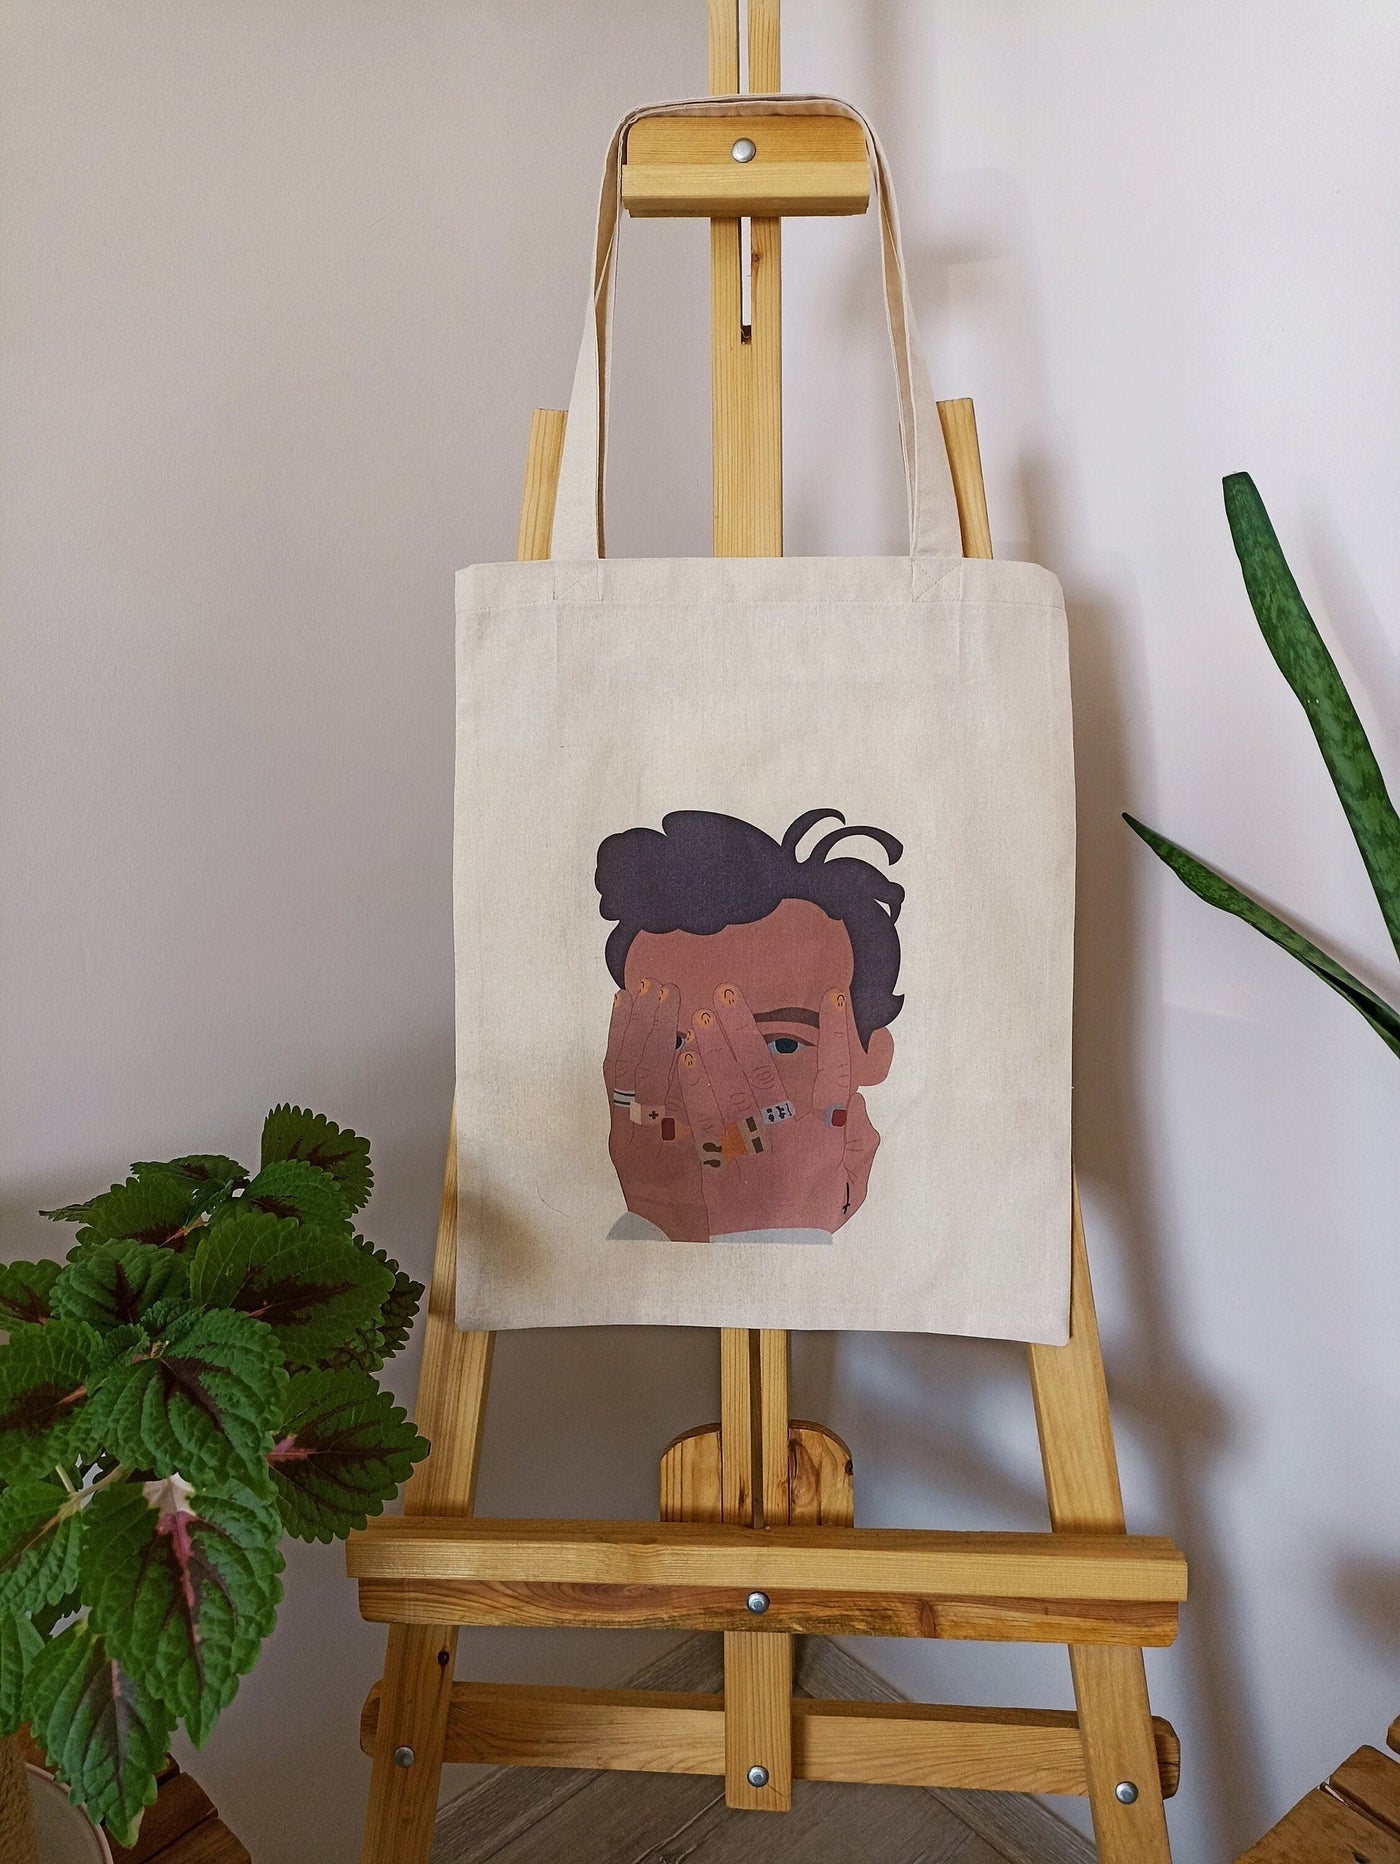 Harry Styles Vogue Tote Bag, Illustration Tote, Harry Styles Merch, Harry Styles Purse Bag